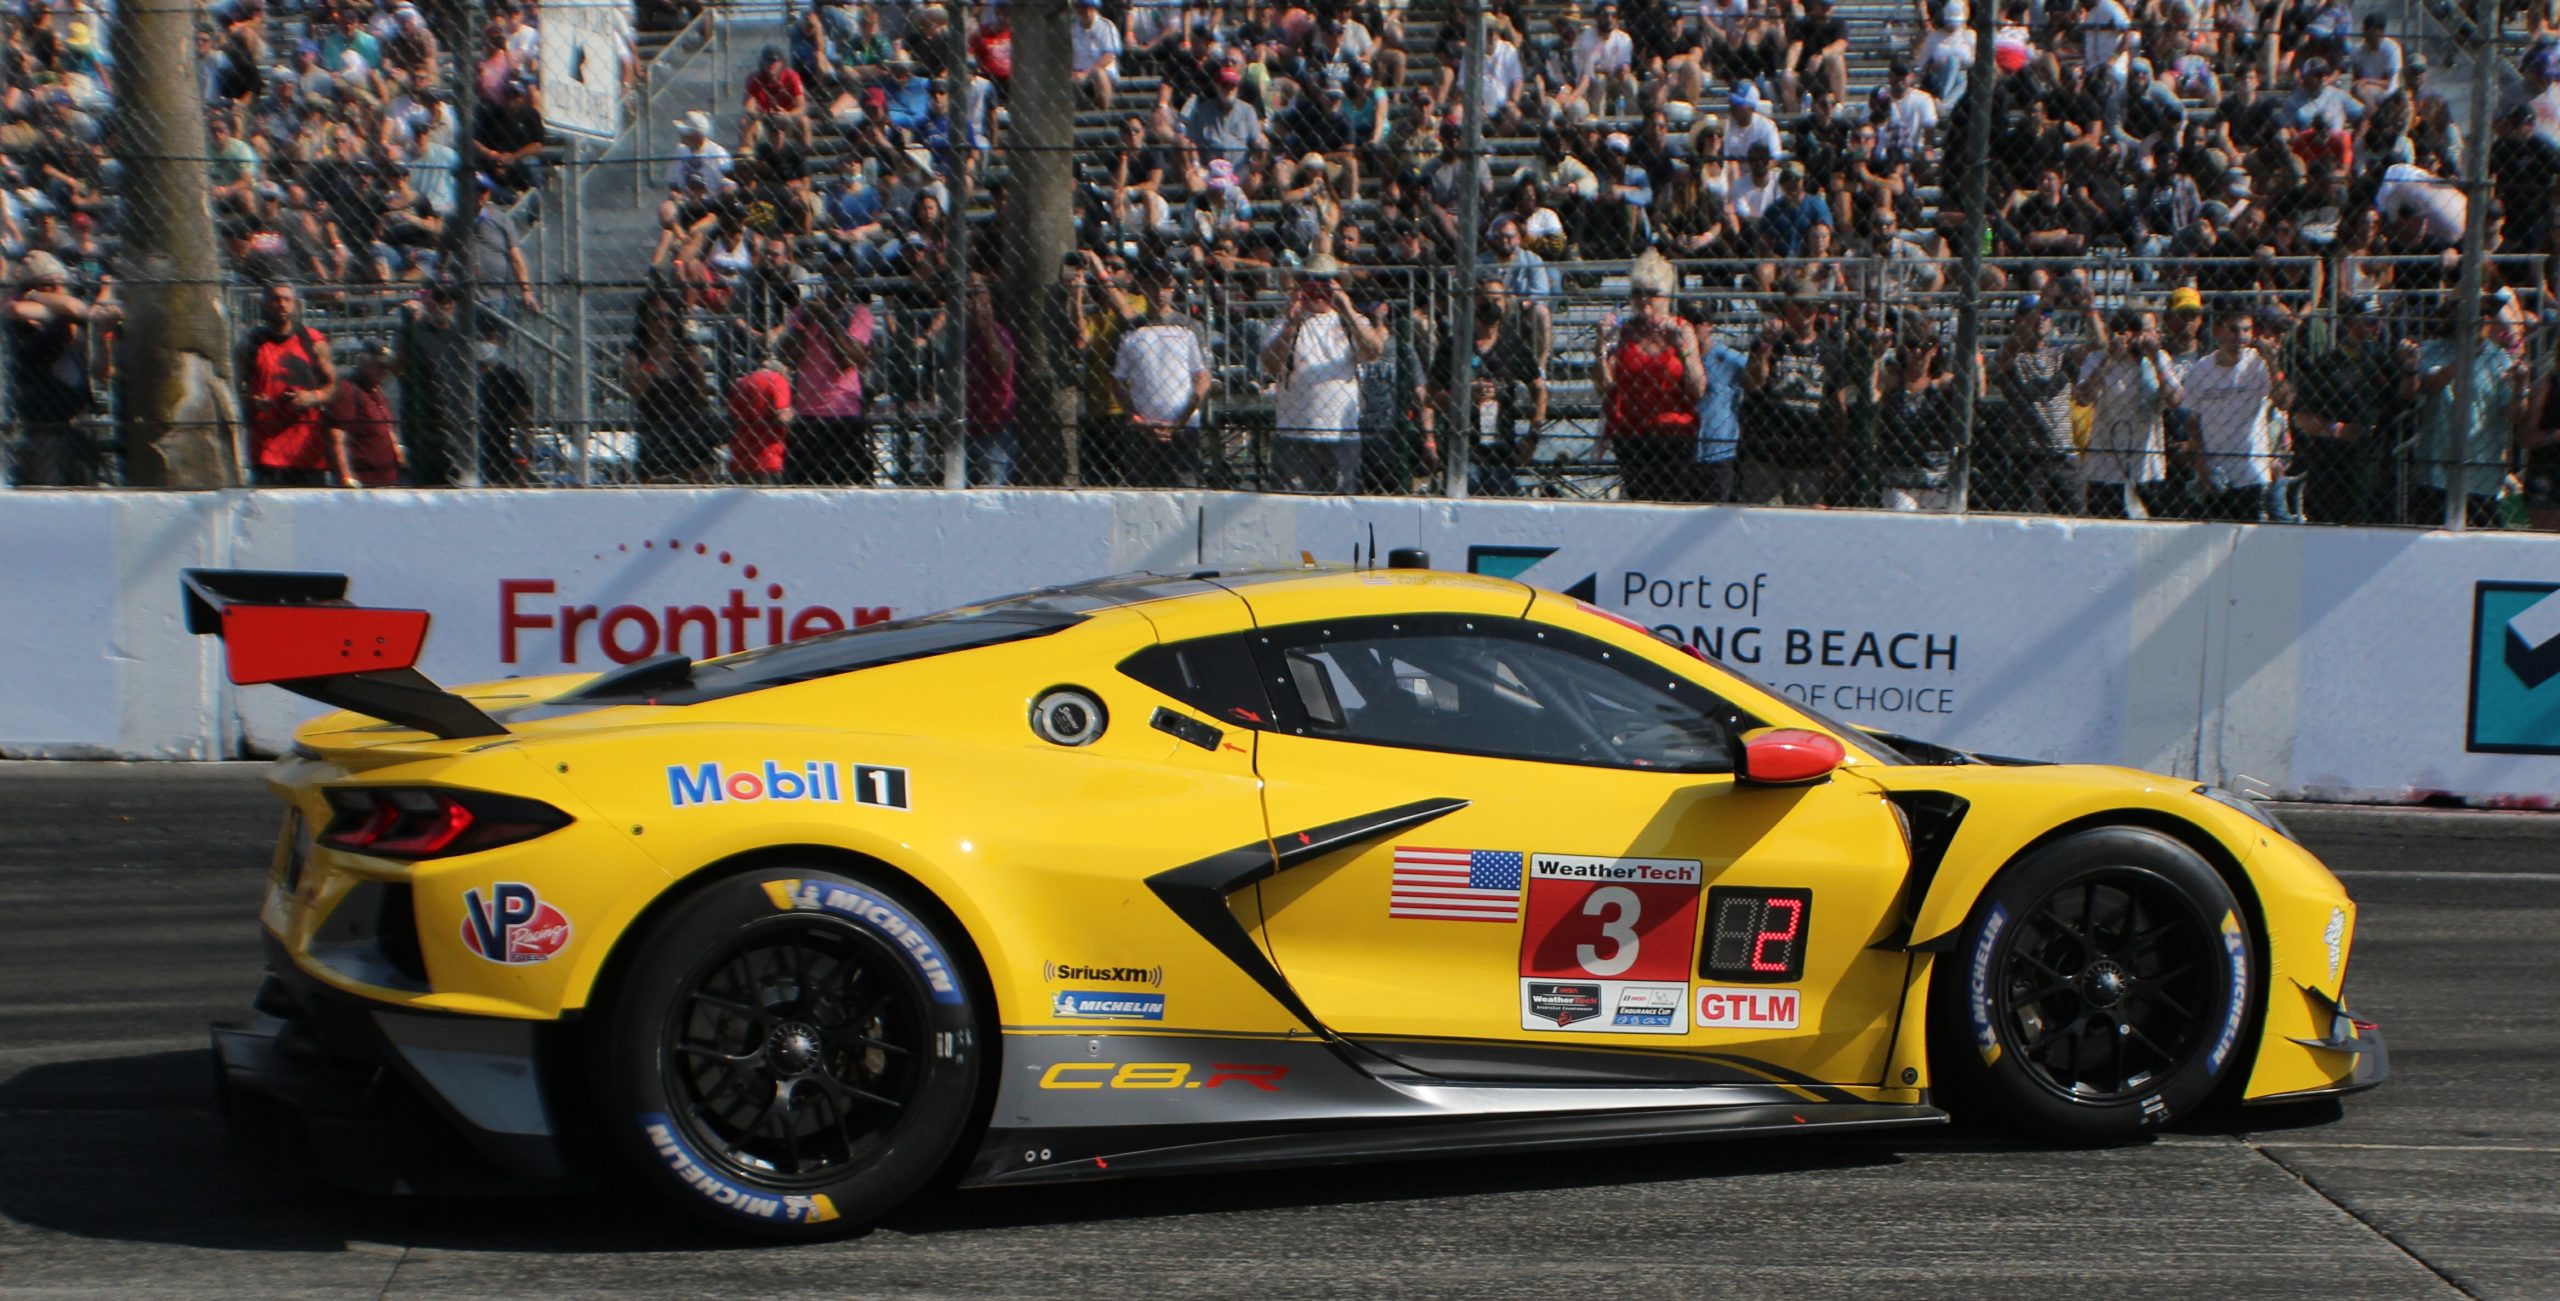 The beautiful lines of the mid-engine C8.R and the sensational sound of the flat-plane crank, small block V8, keeps the fans glued to the fence to witness this all-American muscle. 2021 will be the swan song for the GTLM class in IMSA. Next year Corvette Racing will switch to the GTD category.